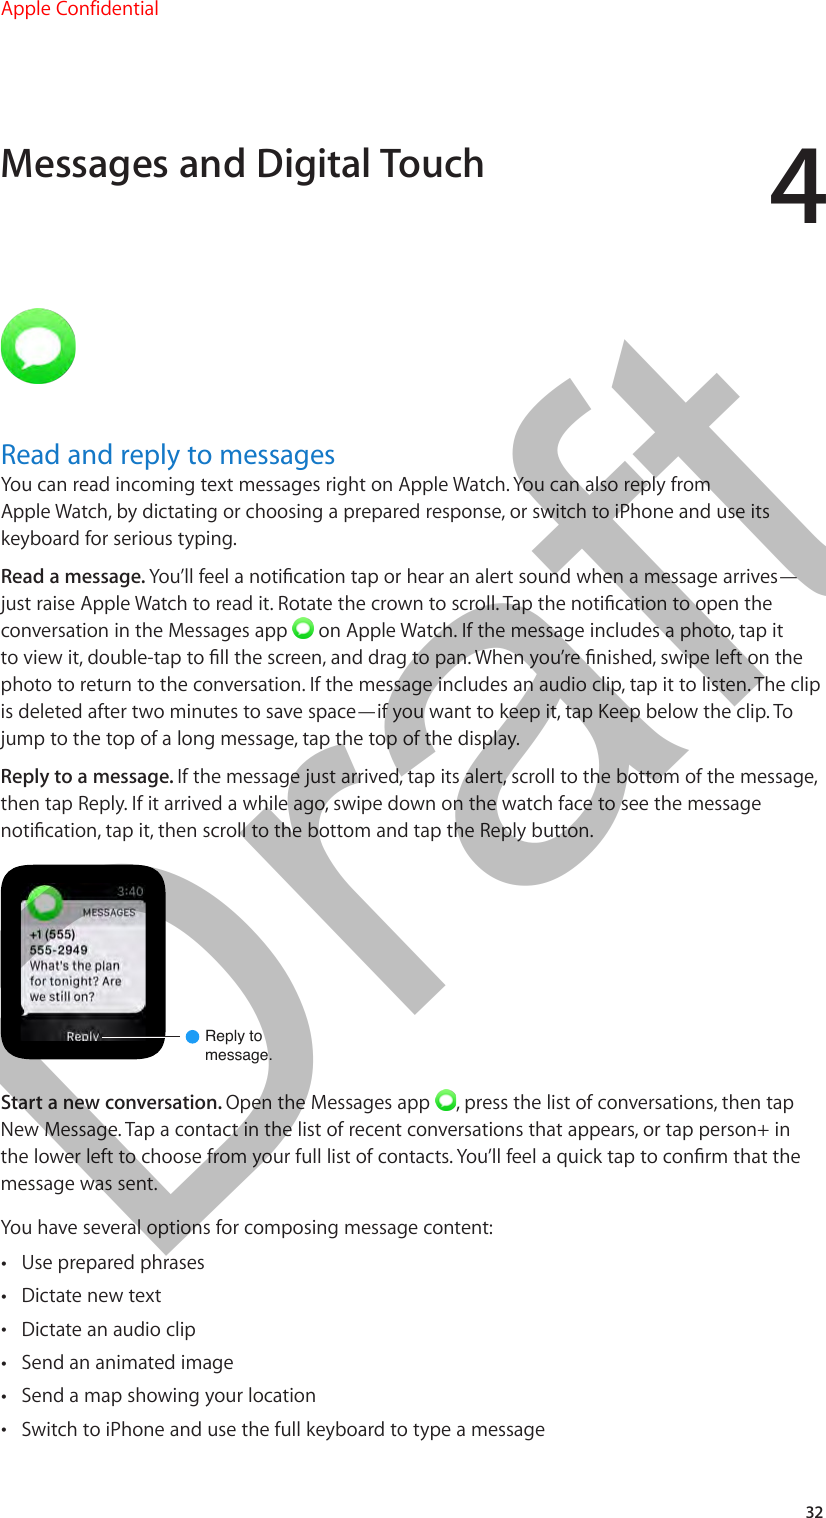 432Read and reply to messagesYou can read incoming text messages right on Apple Watch. You can also reply from Apple Watch, by dictating or choosing a prepared response, or switch to iPhone and use its keyboard for serious typing.Read a message. You’ll feel a notication tap or hear an alert sound when a message arrives—just raise Apple Watch to read it. Rotate the crown to scroll. Tap the notication to open the conversation in the Messages app   on Apple Watch. If the message includes a photo, tap it to view it, double-tap to ll the screen, and drag to pan. When you’re nished, swipe left on the photo to return to the conversation. If the message includes an audio clip, tap it to listen. The clip is deleted after two minutes to save space—if you want to keep it, tap Keep below the clip. To jump to the top of a long message, tap the top of the display.Reply to a message. If the message just arrived, tap its alert, scroll to the bottom of the message, then tap Reply. If it arrived a while ago, swipe down on the watch face to see the message notication, tap it, then scroll to the bottom and tap the Reply button.Reply tomessage.Start a new conversation. Open the Messages app  , press the list of conversations, then tap New Message. Tap a contact in the list of recent conversations that appears, or tap person+ in the lower left to choose from your full list of contacts. You’ll feel a quick tap to conrm that the message was sent.You have several options for composing message content: •Use prepared phrases •Dictate new text •Dictate an audio clip •Send an animated image •Send a map showing your location •Switch to iPhone and use the full keyboard to type a messageMessages and Digital TouchApple Confidential  100% resize factorDraft